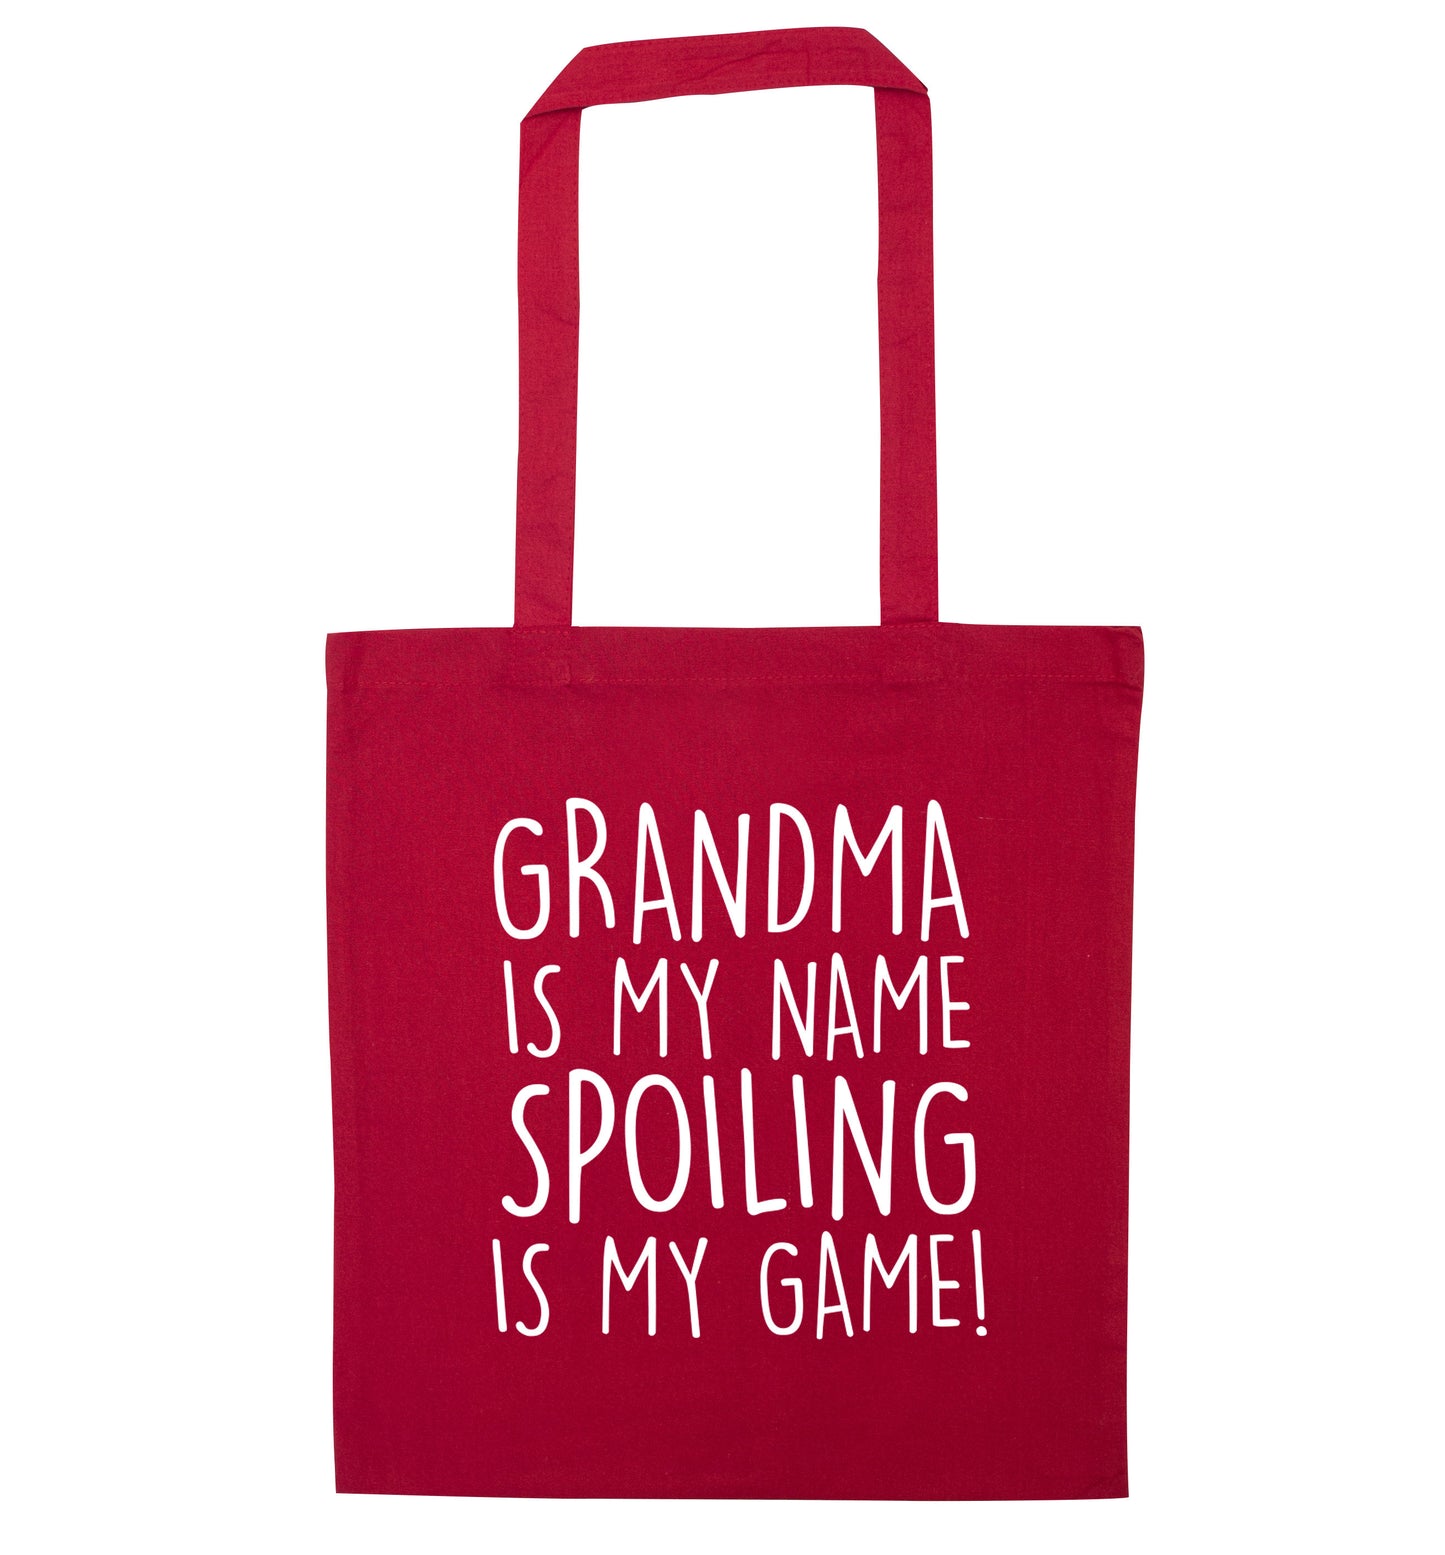 Grandma is my name, spoiling is my game red tote bag